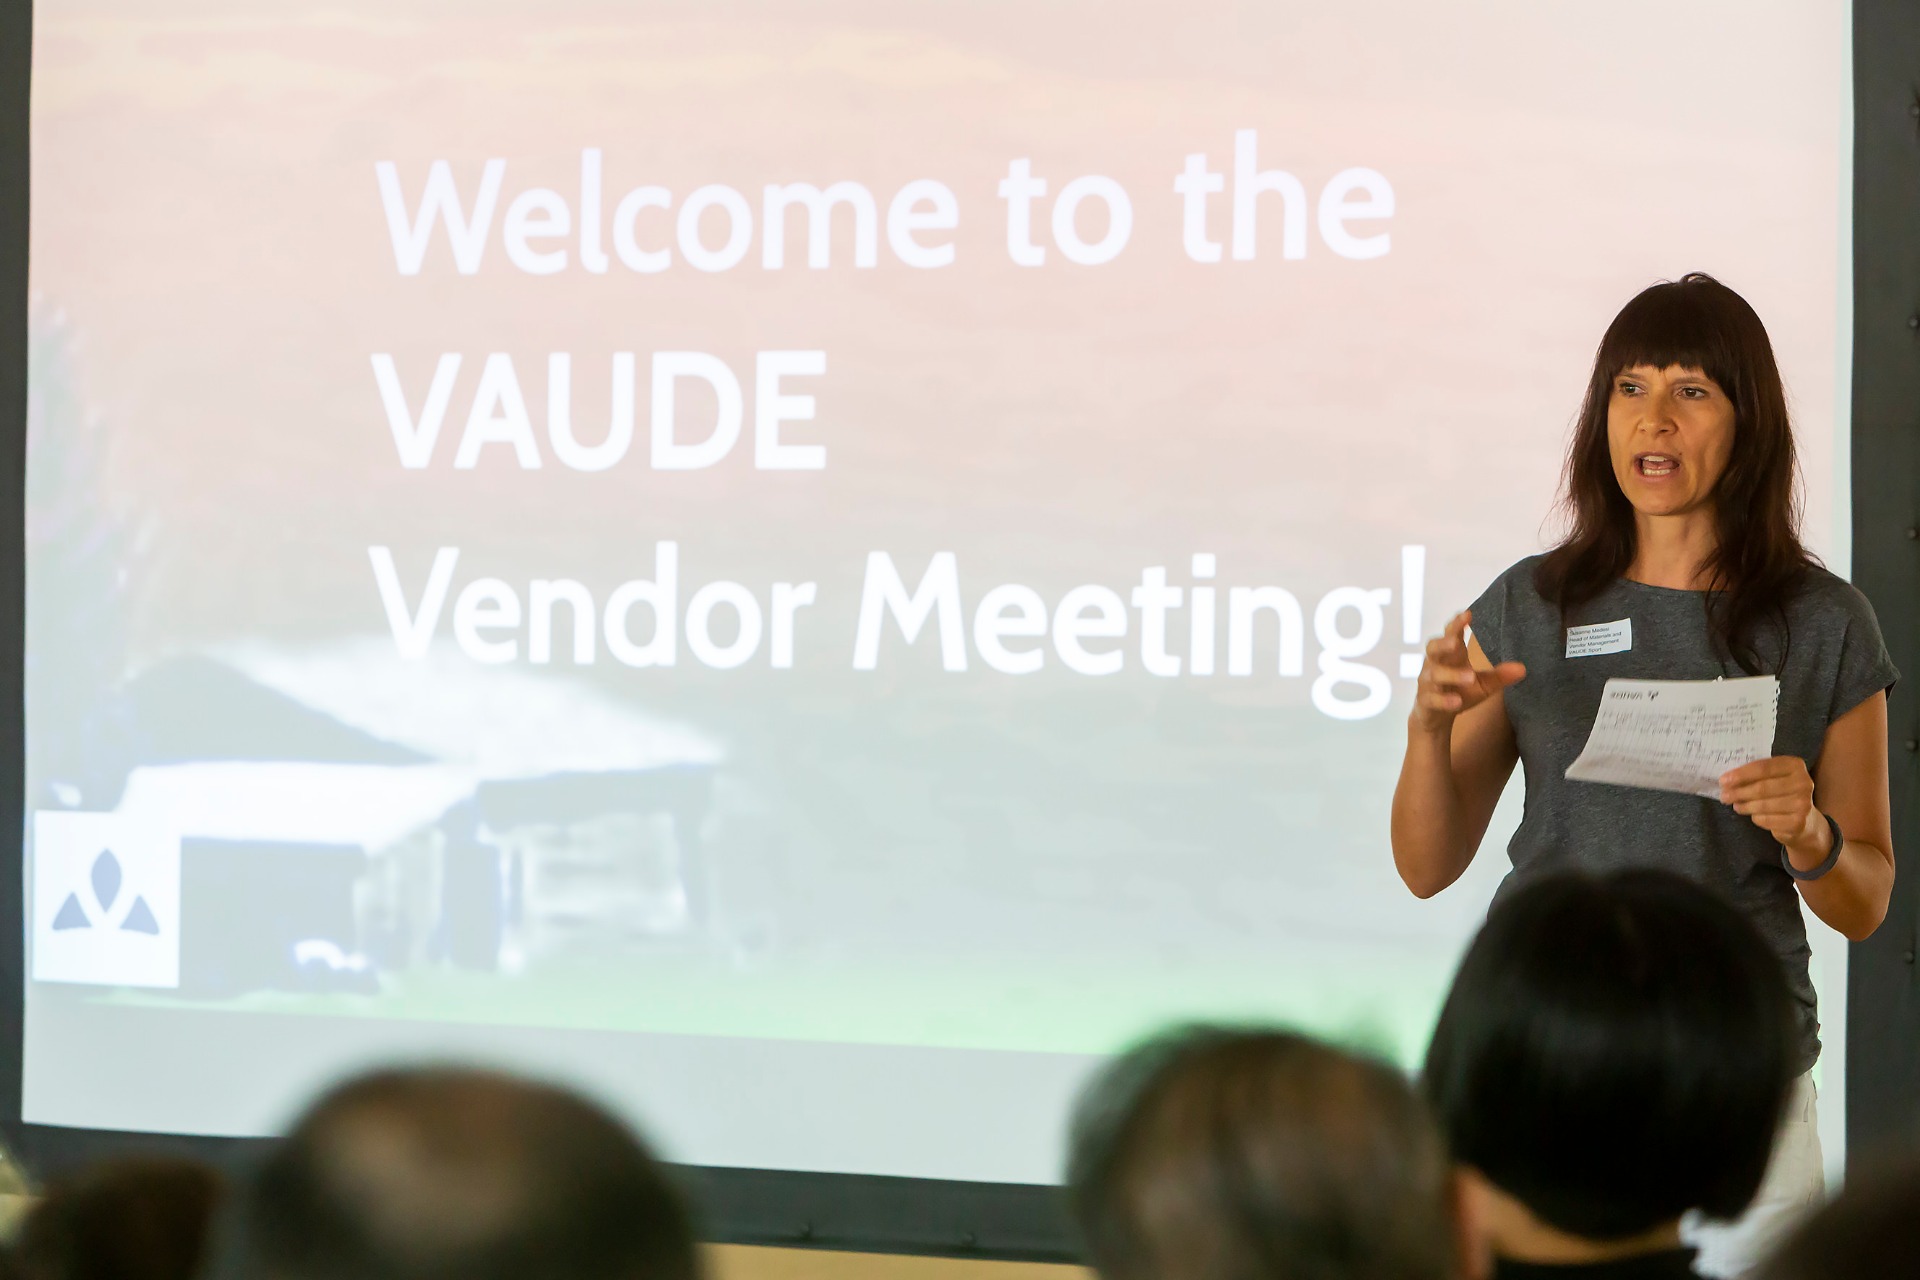 Welcome to the VAUDE Vendor Meeting